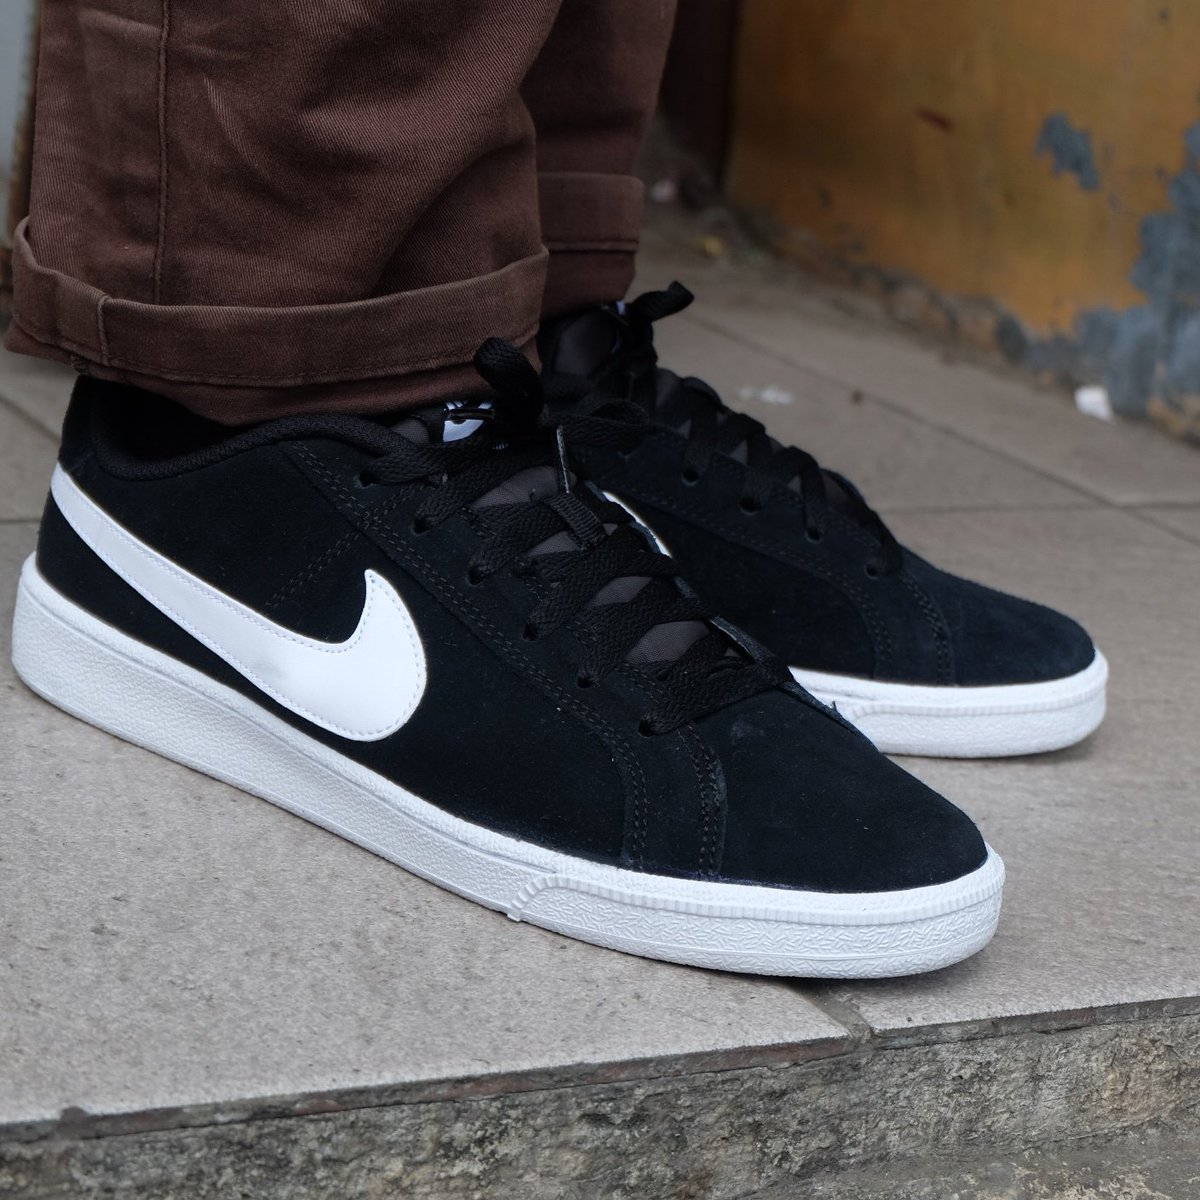 Vær modløs Rejsende kabel Pegashoes Bandung on Twitter: "NIKE COURT ROYALE (SUEDE BLACK WHITE)  ORIGINAL MADE IN INDONESIA BRAND NEW WITH REPLACE BOX  https://t.co/nkVXs1dcMt" / Twitter